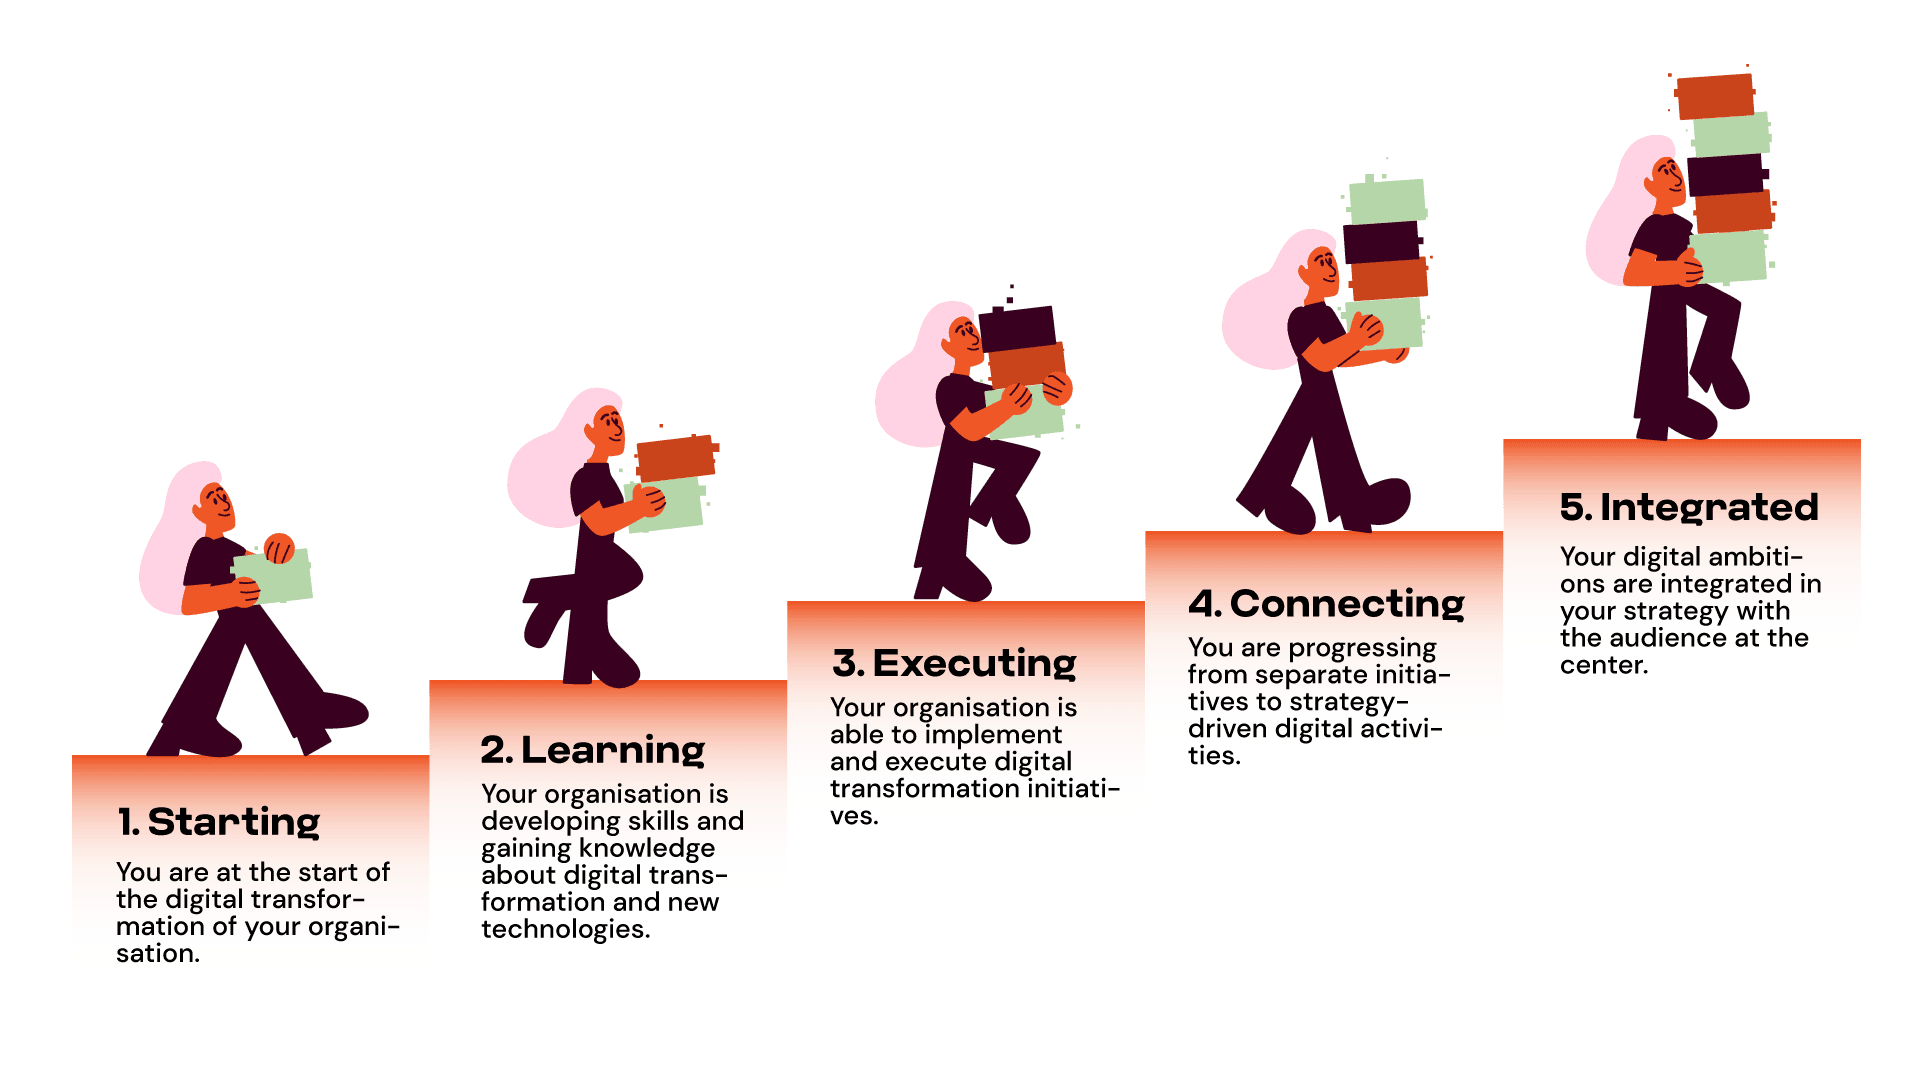 Five phases of digital transformation: starting, learning, executing, connecting and integrated.